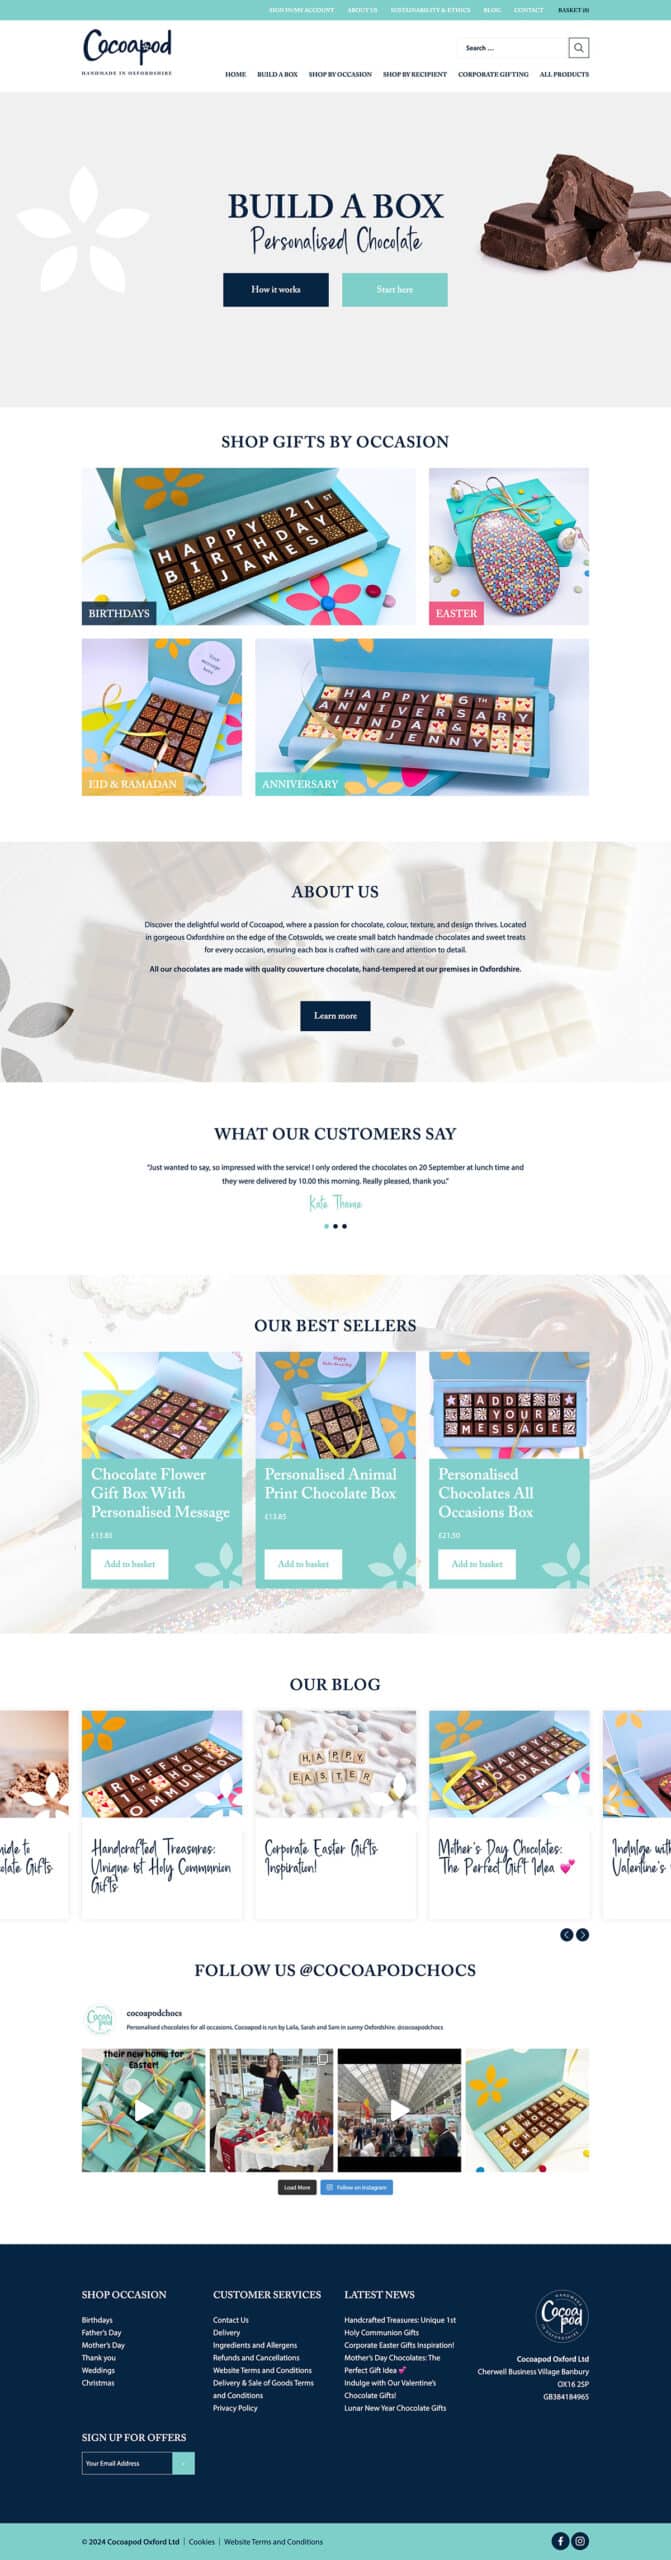 Design and build of an ecommerce site for chocoloate manufacturer